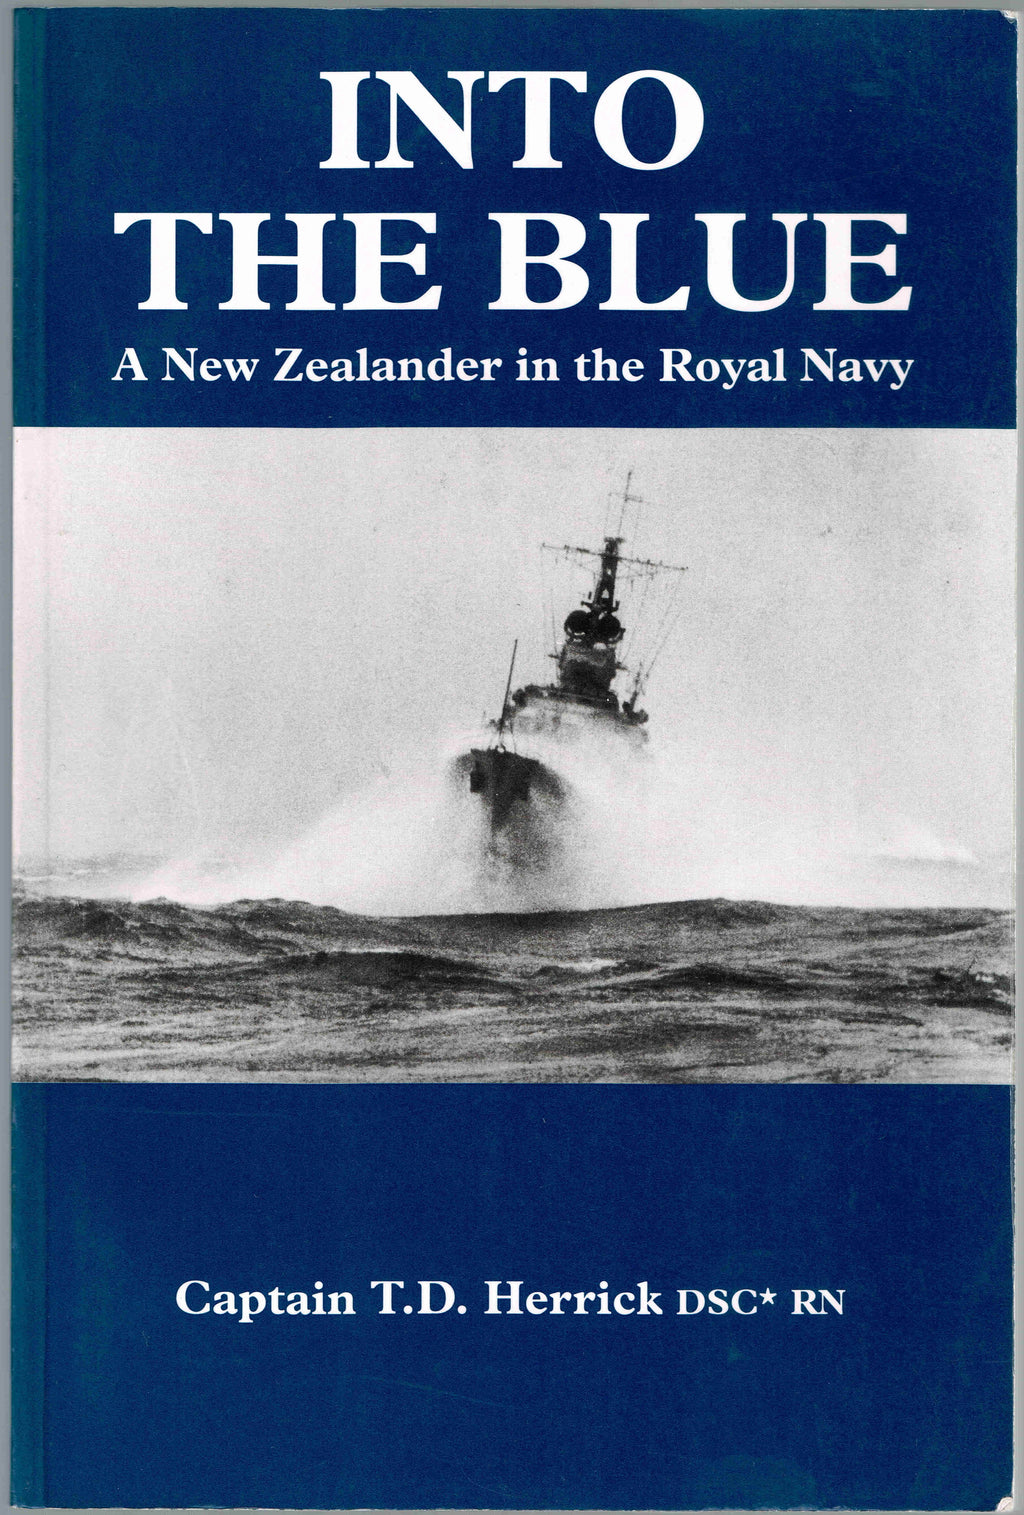 Into the Blue: A New Zealander in the Royal Navy - by By Captain Terry T. D. Herrick DSC* RN. [Signed First Edition]